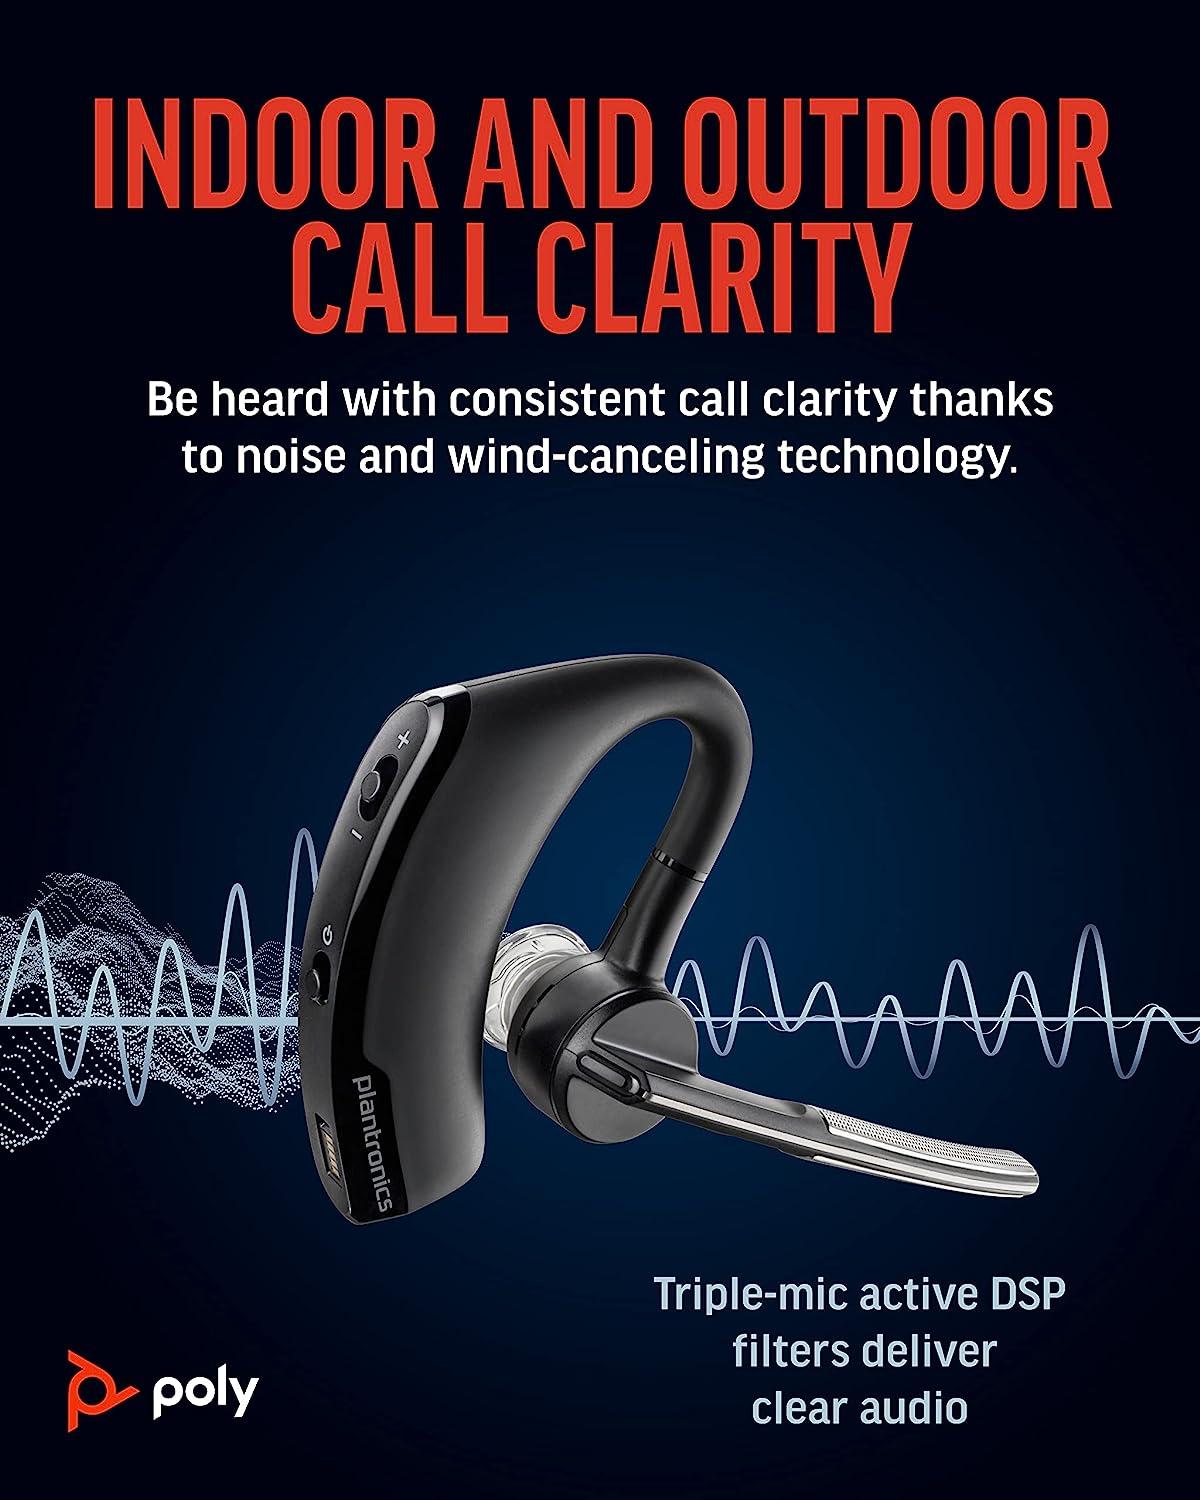 Poly Voyager Legend Wireless Headset (Plantronics) - Single-Ear Bluetooth  w/Noise-Canceling Mic - Voice Controls - Mute & Volume Buttons - Ergonomic  Design -Connect to Mobile/Tablet via Bluetooth -FFP